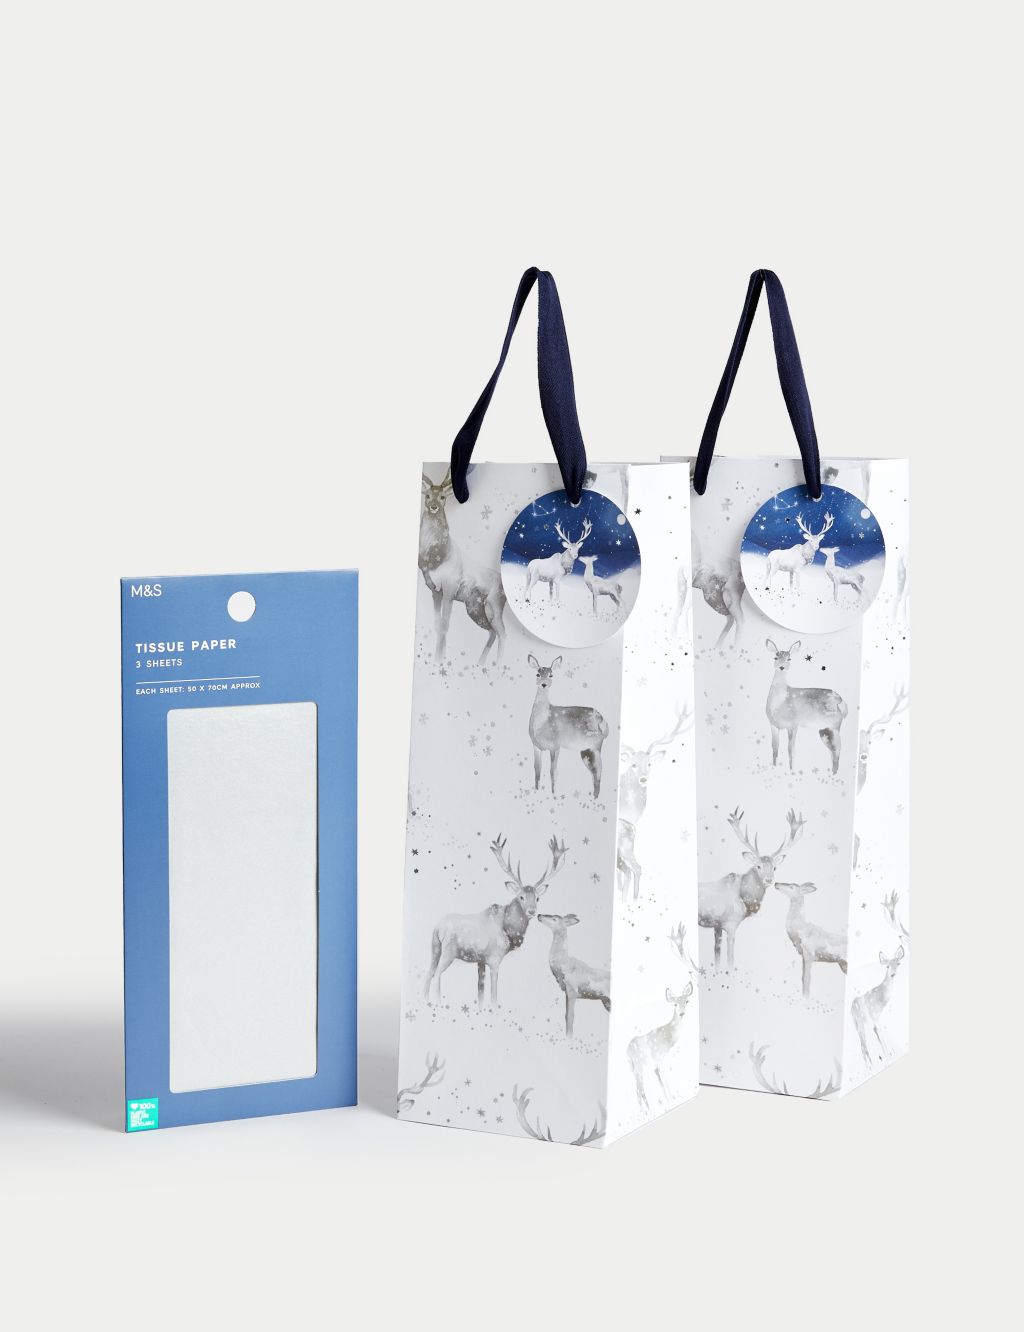 John Lewis Marble Bottle Gift Bag with Silver Tissue Paper